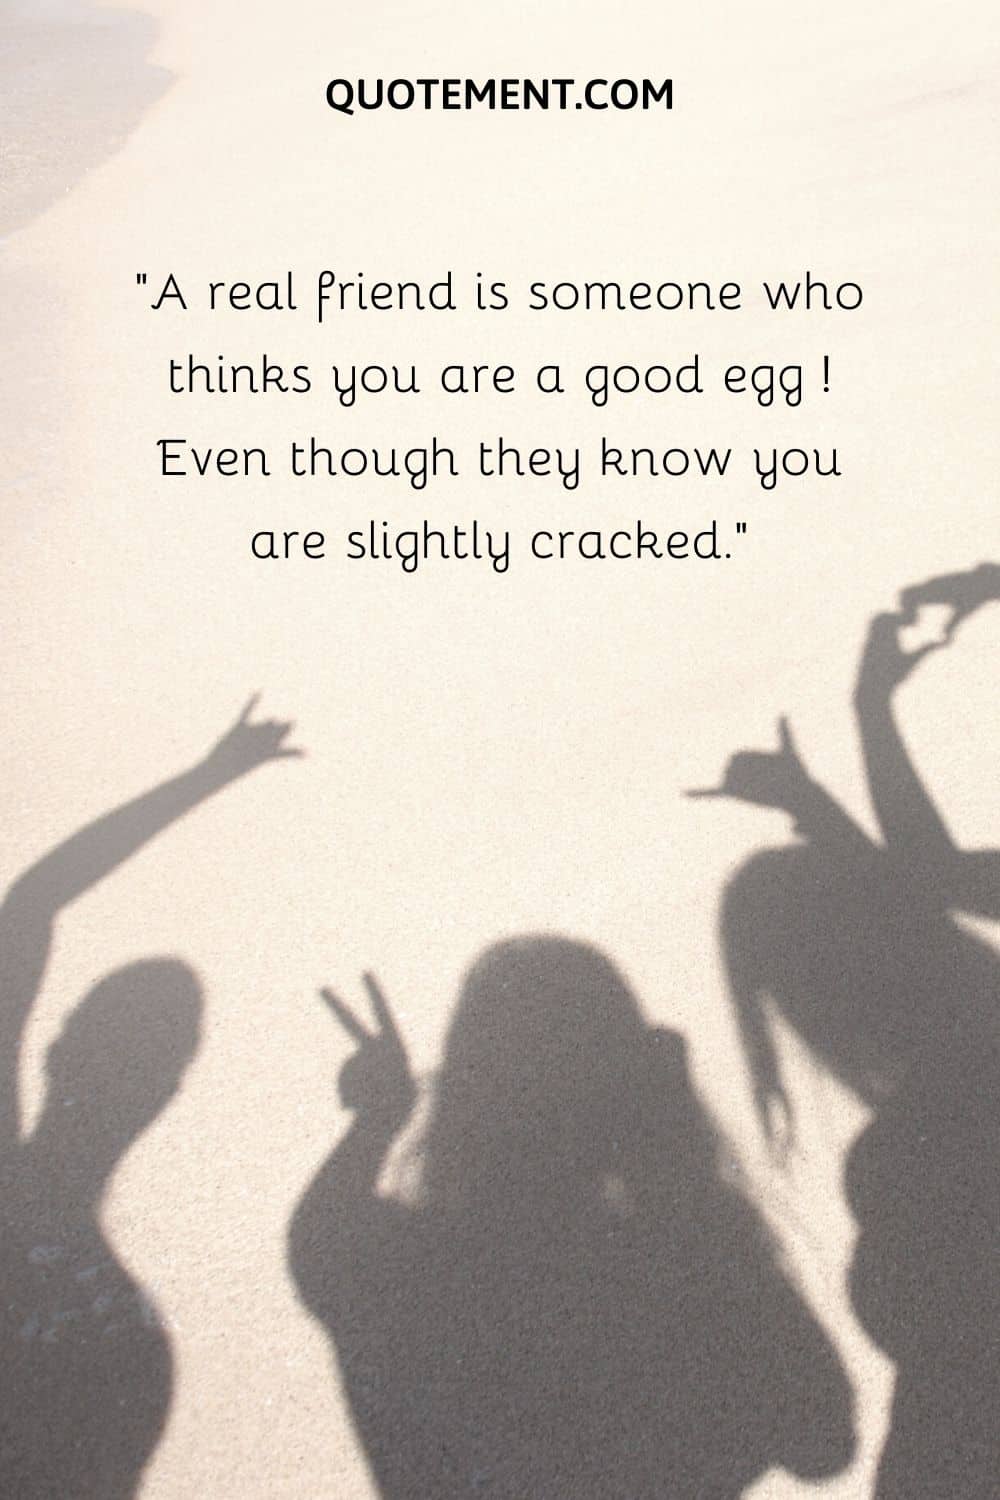 A real friend is someone who thinks you are a good egg